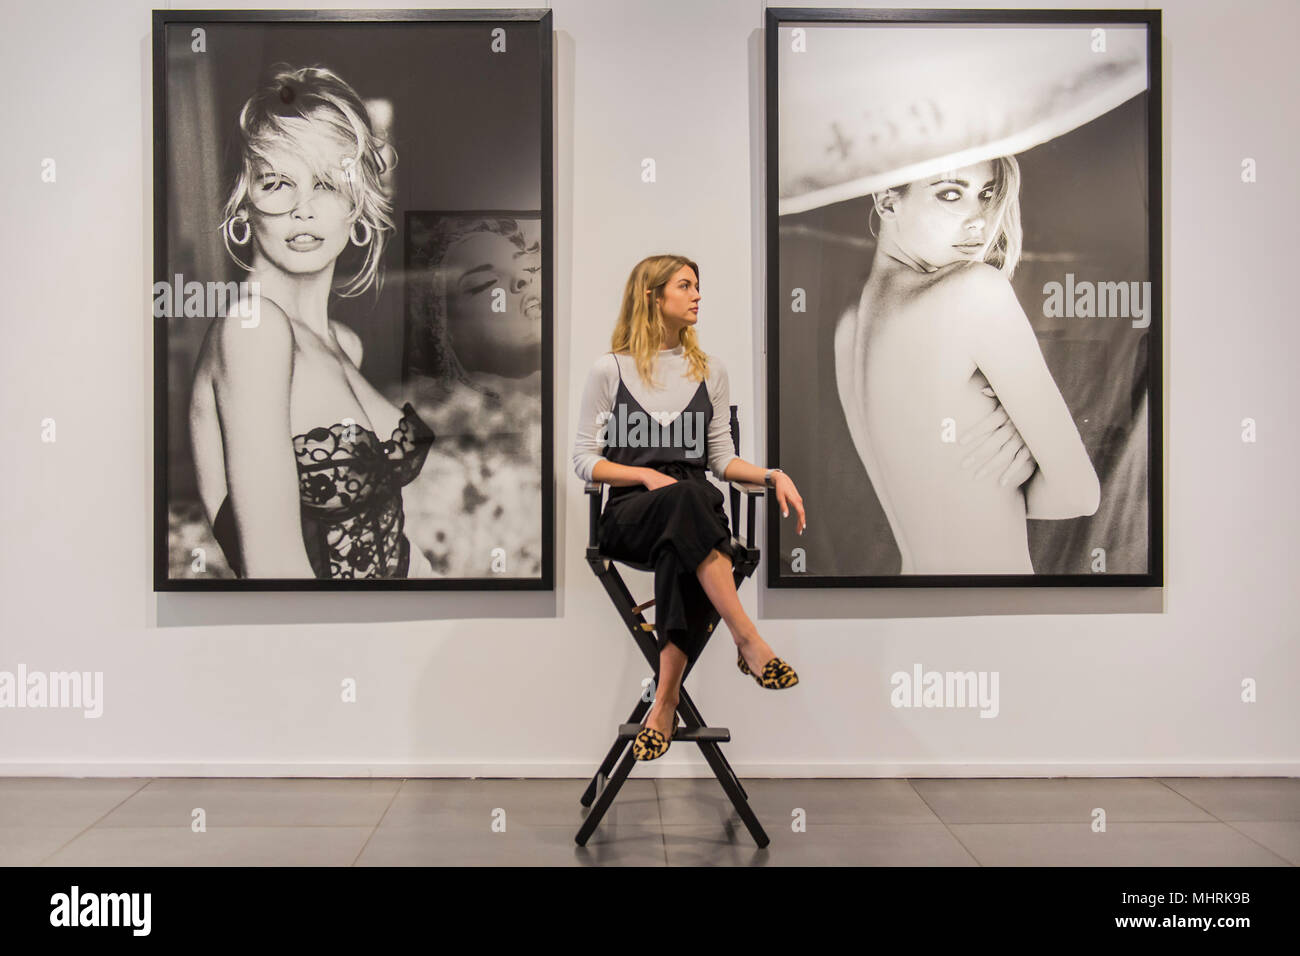 London, UK. 3rd May 2018. Claudia Schiffer, 1989, and Parasol, 1990 - Ladyland by Ellen von Unwerth, female fashion photographer, a new exhibition of over 40 of her most famous photographs from the 1990s to present day at London’s Opera Gallery in Mayfair. Credit: Guy Bell/Alamy Live News Stock Photo